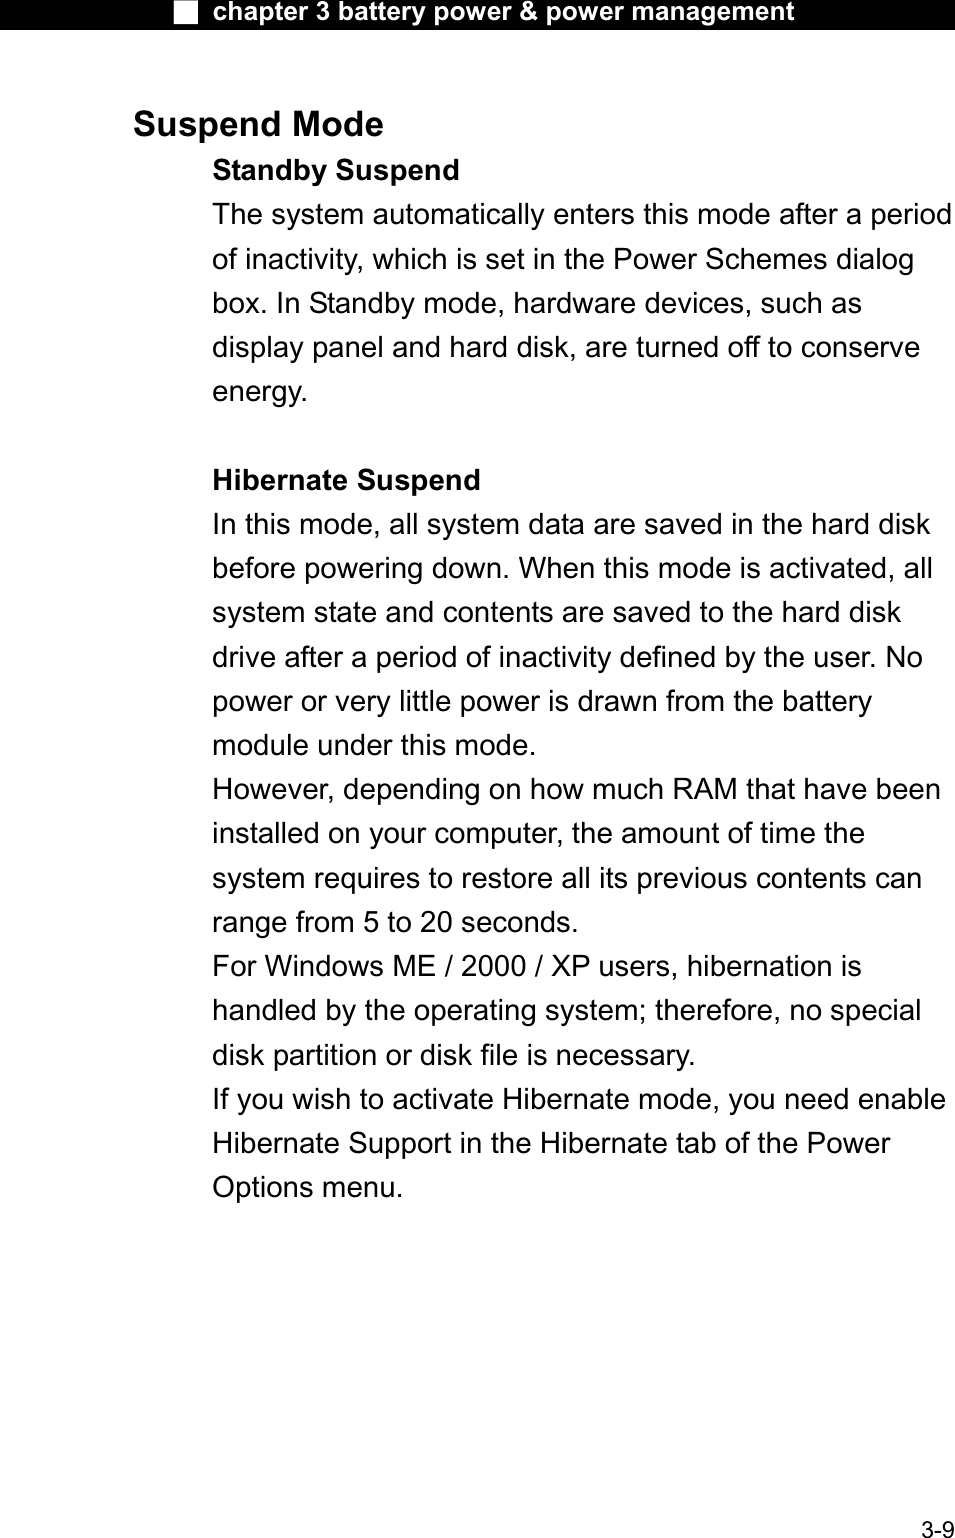 Ϯ chapter 3 battery power &amp; power managementSuspend Mode Standby SuspendThe system automatically enters this mode after a periodof inactivity, which is set in the Power Schemes dialogbox. In Standby mode, hardware devices, such asdisplay panel and hard disk, are turned off to conserveenergy.Hibernate SuspendIn this mode, all system data are saved in the hard diskbefore powering down. When this mode is activated, allsystem state and contents are saved to the hard disk drive after a period of inactivity defined by the user. No power or very little power is drawn from the battery module under this mode. However, depending on how much RAM that have been installed on your computer, the amount of time the system requires to restore all its previous contents canrange from 5 to 20 seconds.For Windows ME / 2000 / XP users, hibernation ishandled by the operating system; therefore, no specialdisk partition or disk file is necessary.If you wish to activate Hibernate mode, you need enableHibernate Support in the Hibernate tab of the Power Options menu. 3-9